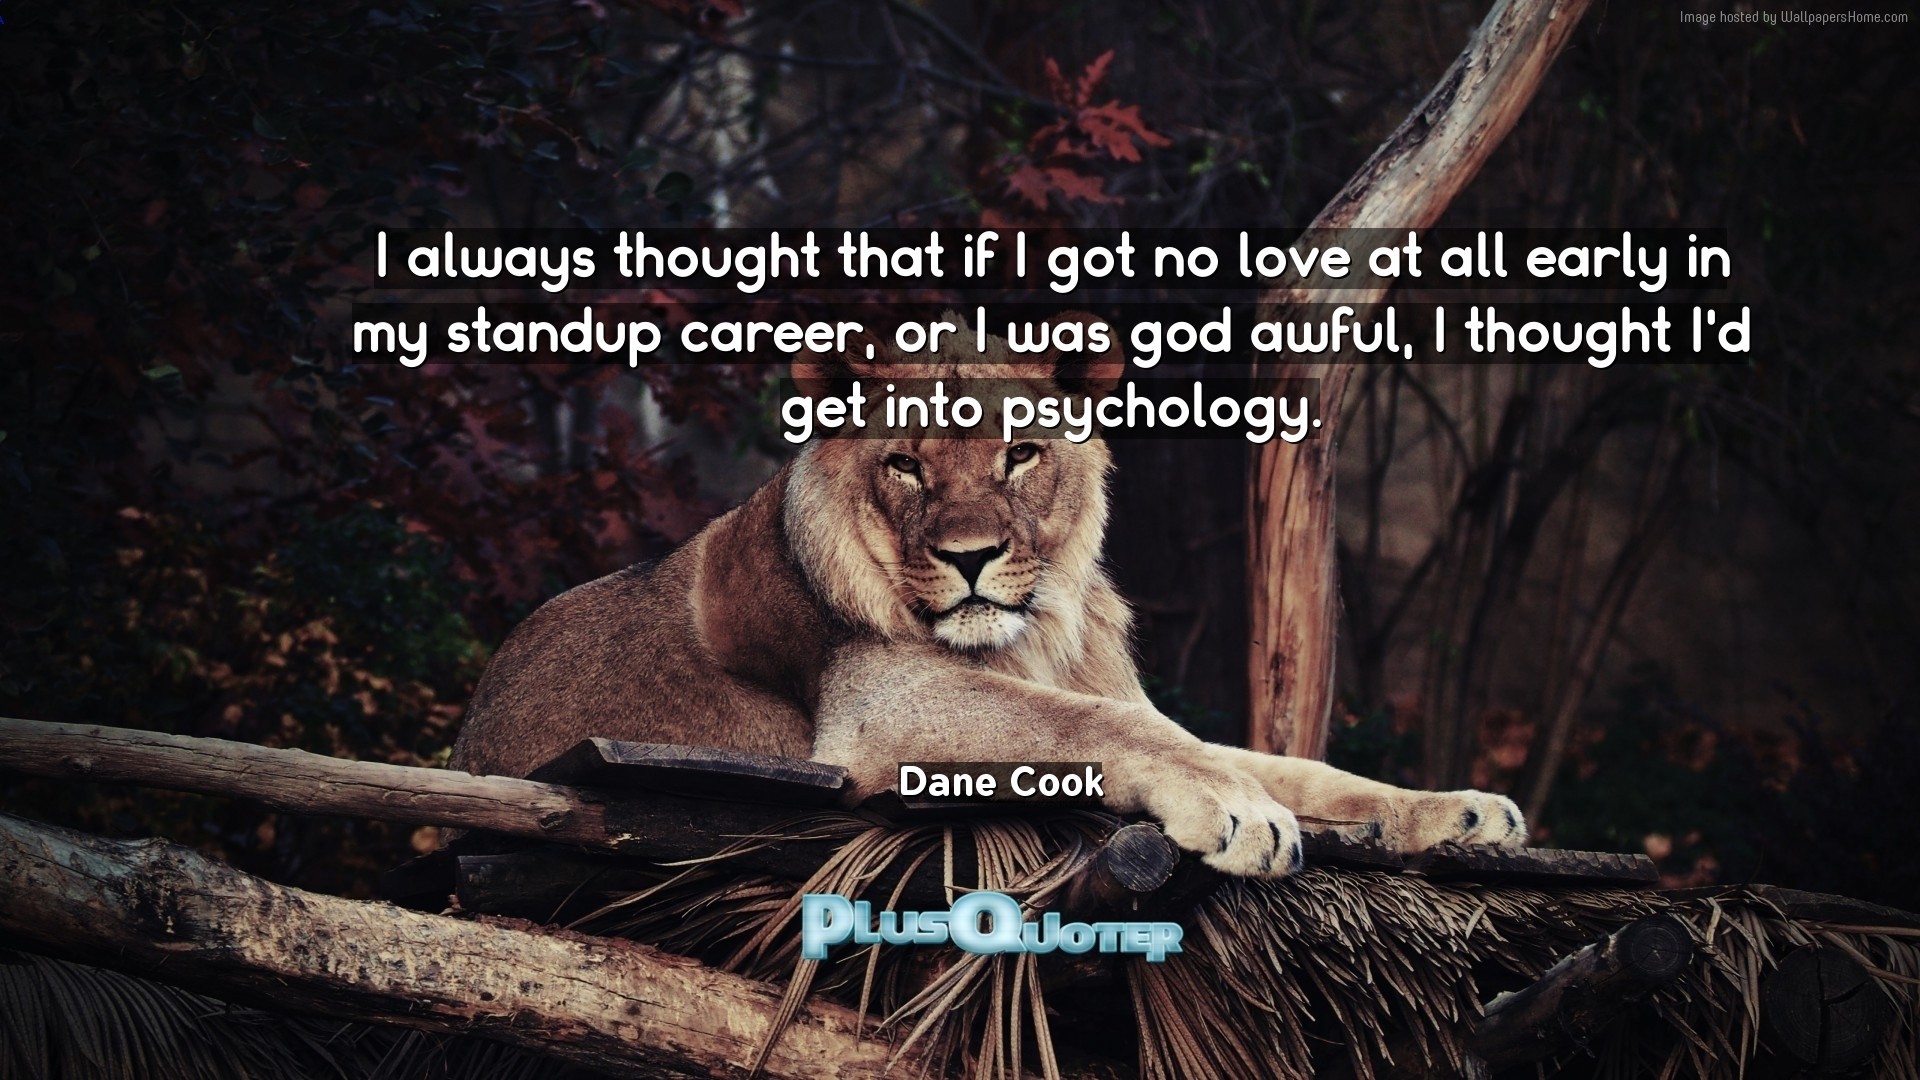 1920x1080 Download Wallpaper with inspirational Quotes- "I always thought that if I  got no love. “